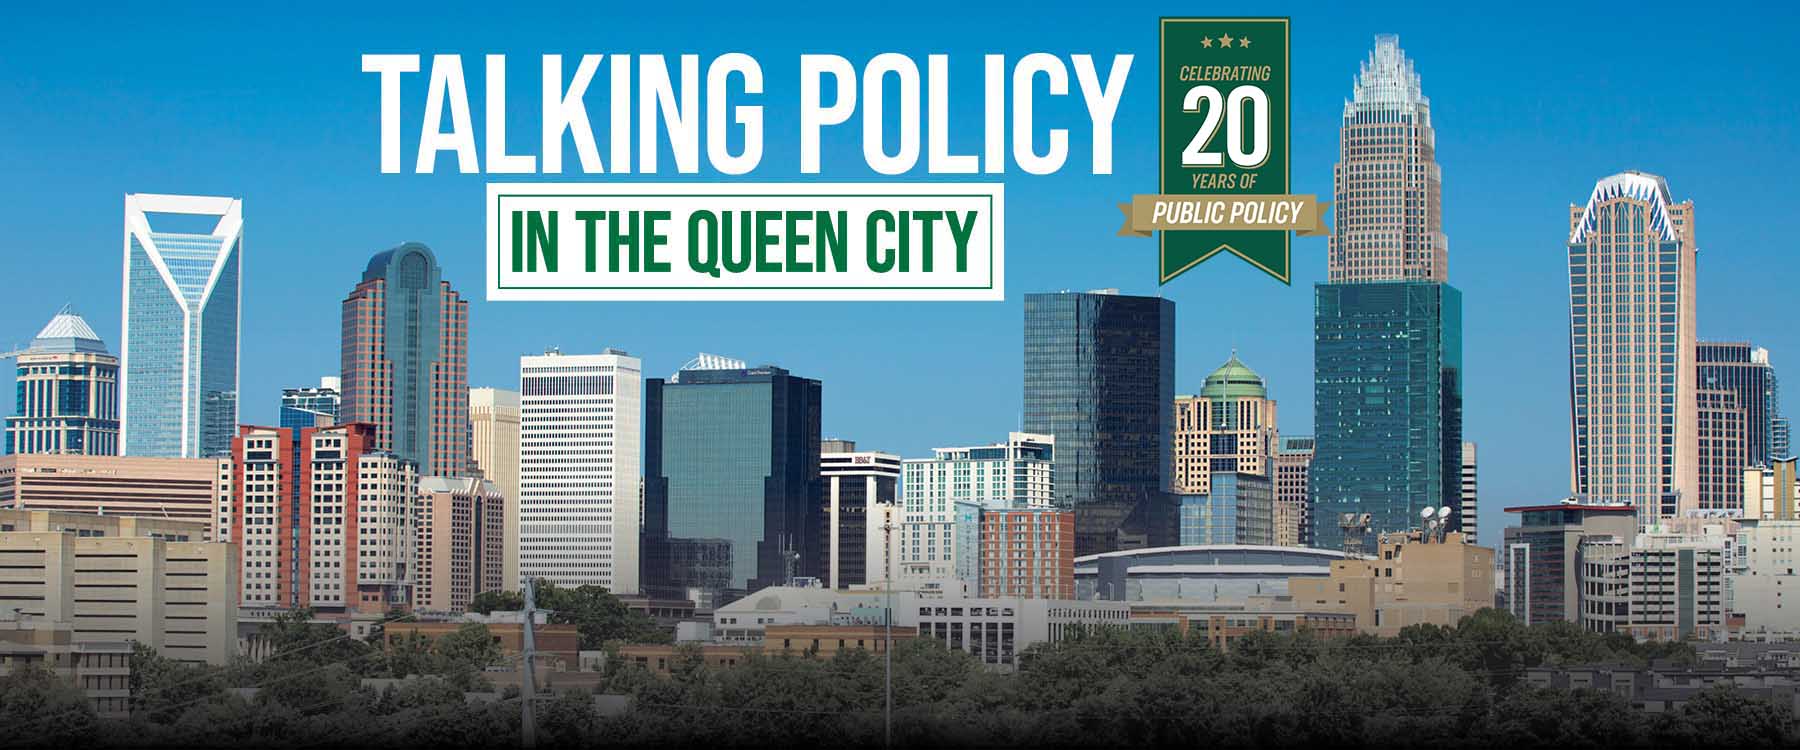 Talking Policy in the Queen City